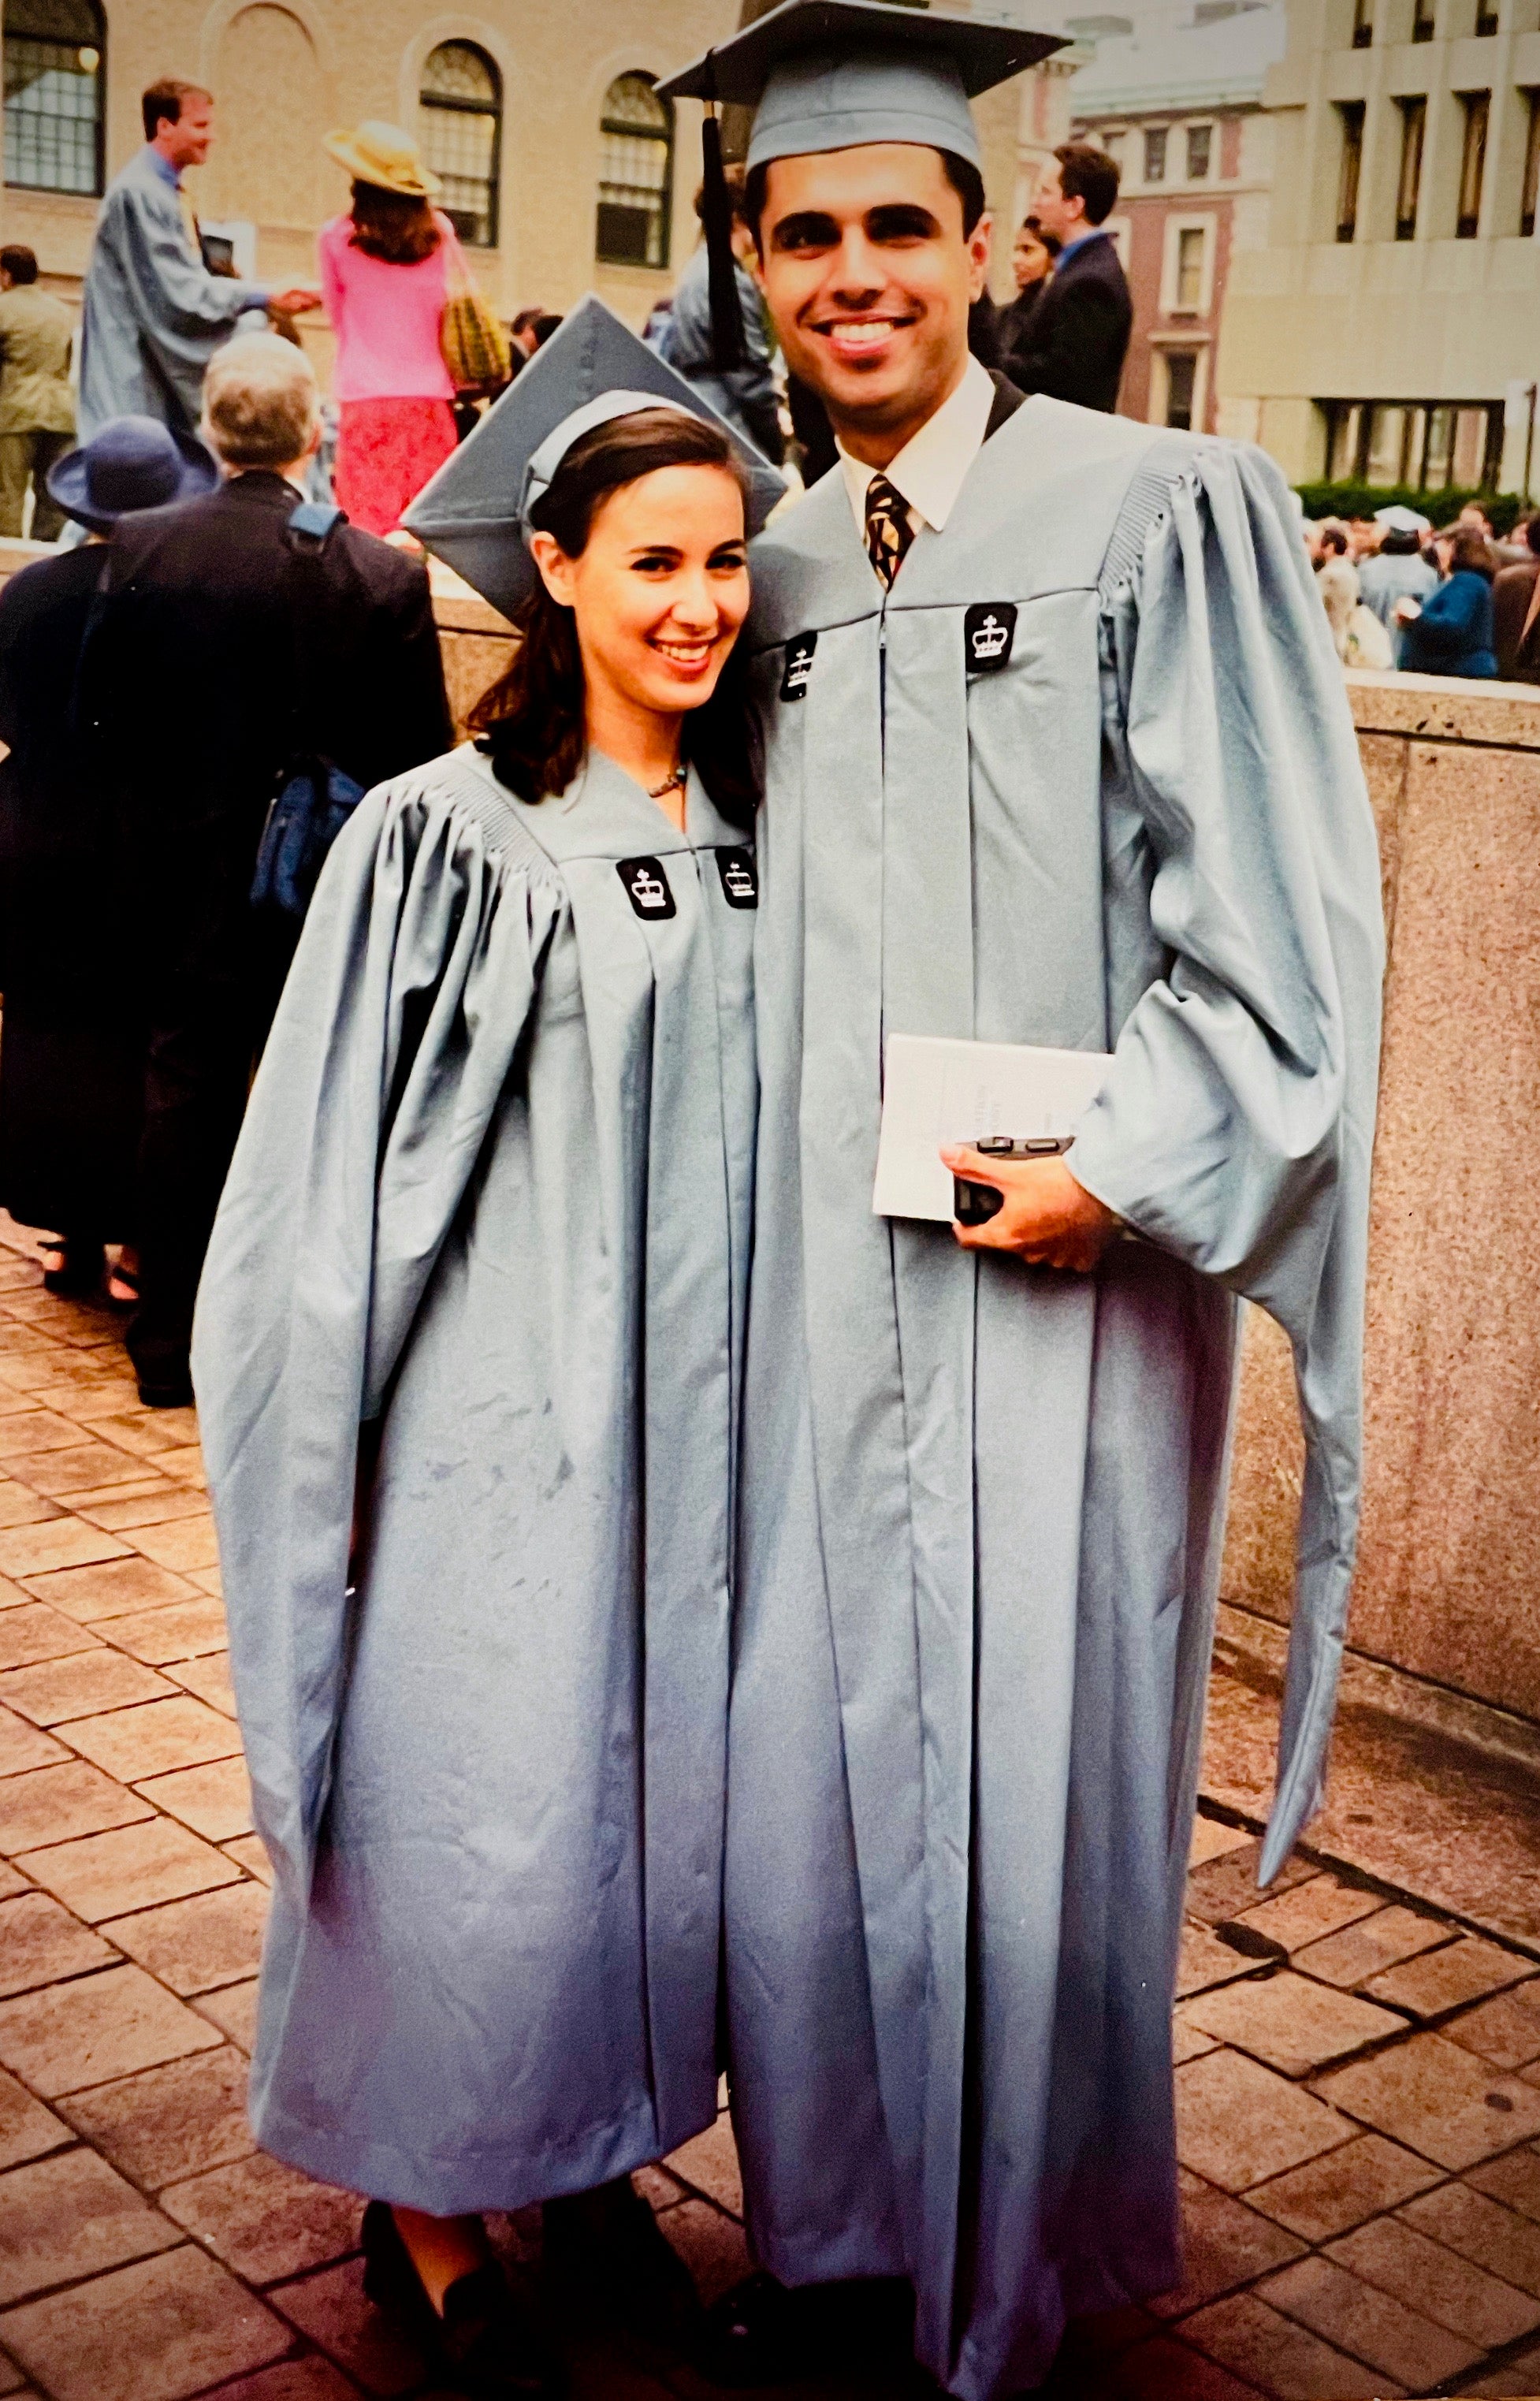 Masada and her friend Hassan at graduation together